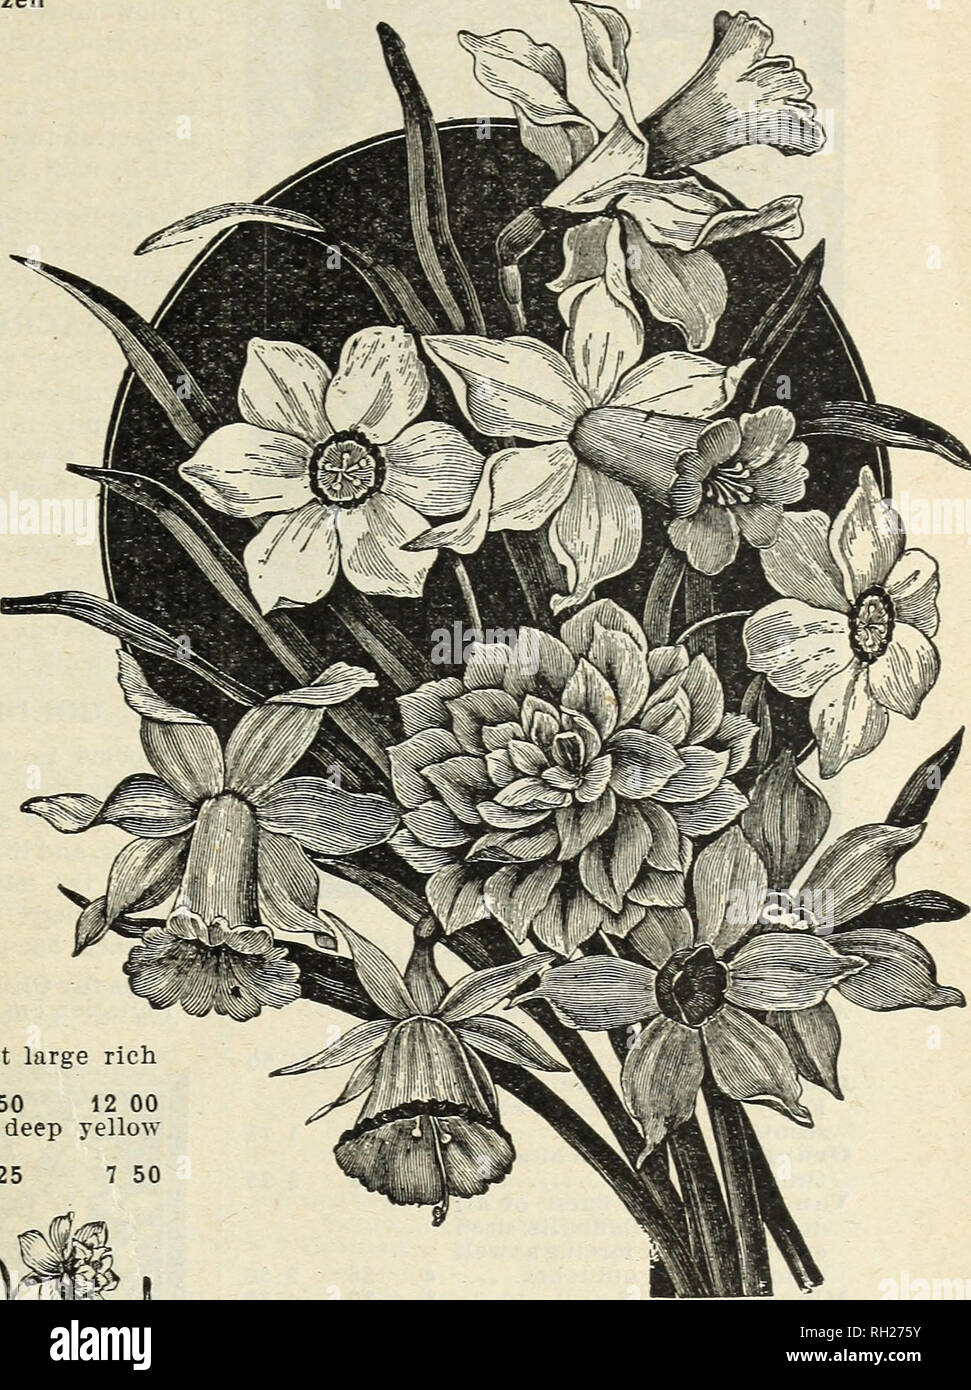 . Bulbs and plants : autumn 1898. Flowers Seeds Catalogs; Bulbs (Plants) Seeds Catalogs; Vegetables Seeds Catalogs; Nurseries (Horticulture) Catalogs; Plants, Ornamental Catalogs; Gardening Equipment and supplies Catalogs. DOUBLE DAFFODILS. Horsfieldi (King of Daffodils)— Immense flowers, yellow trumpet, with white perianth 12 1 25 7 50 L,eedsi Elegans—Silvery white perianth, primrose cup 3 30 2 00 Maximus — Early and large, color deep •golden yellow 12 1 25 7 50 Poeticus (Pheasant's Eve) — Suow white, with citron cup 3 20 1 00 Poeticus Ornatus—Earlier than the pre- ceding, flowers white, scar Stock Photo